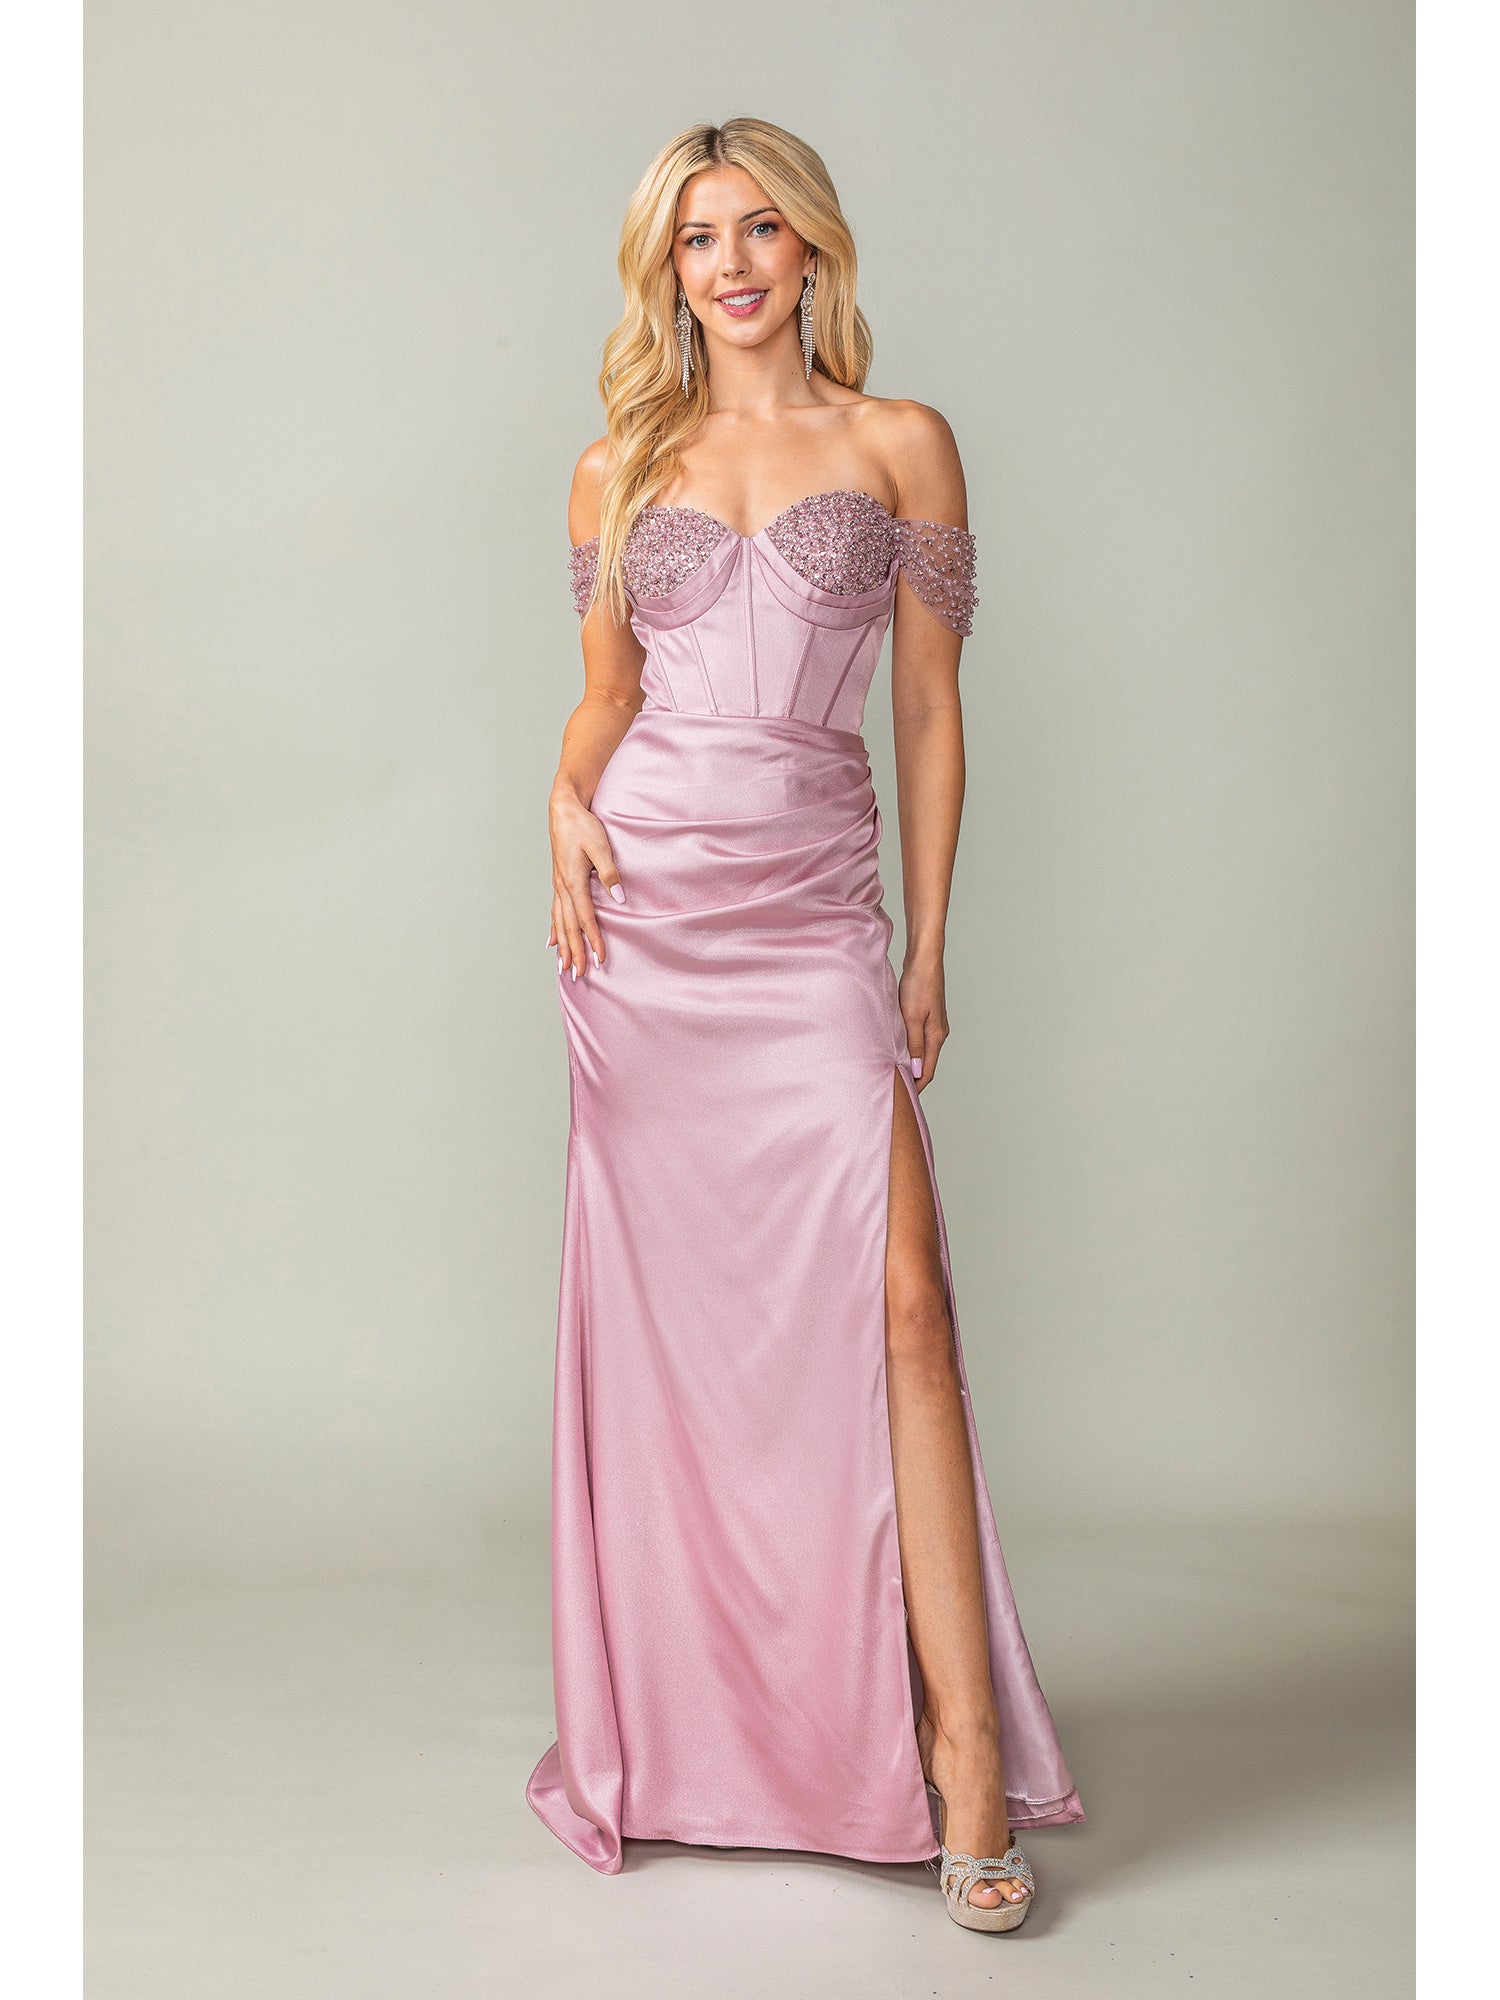 Off-the-Shoulder Long Prom Dress 4401 with Beads